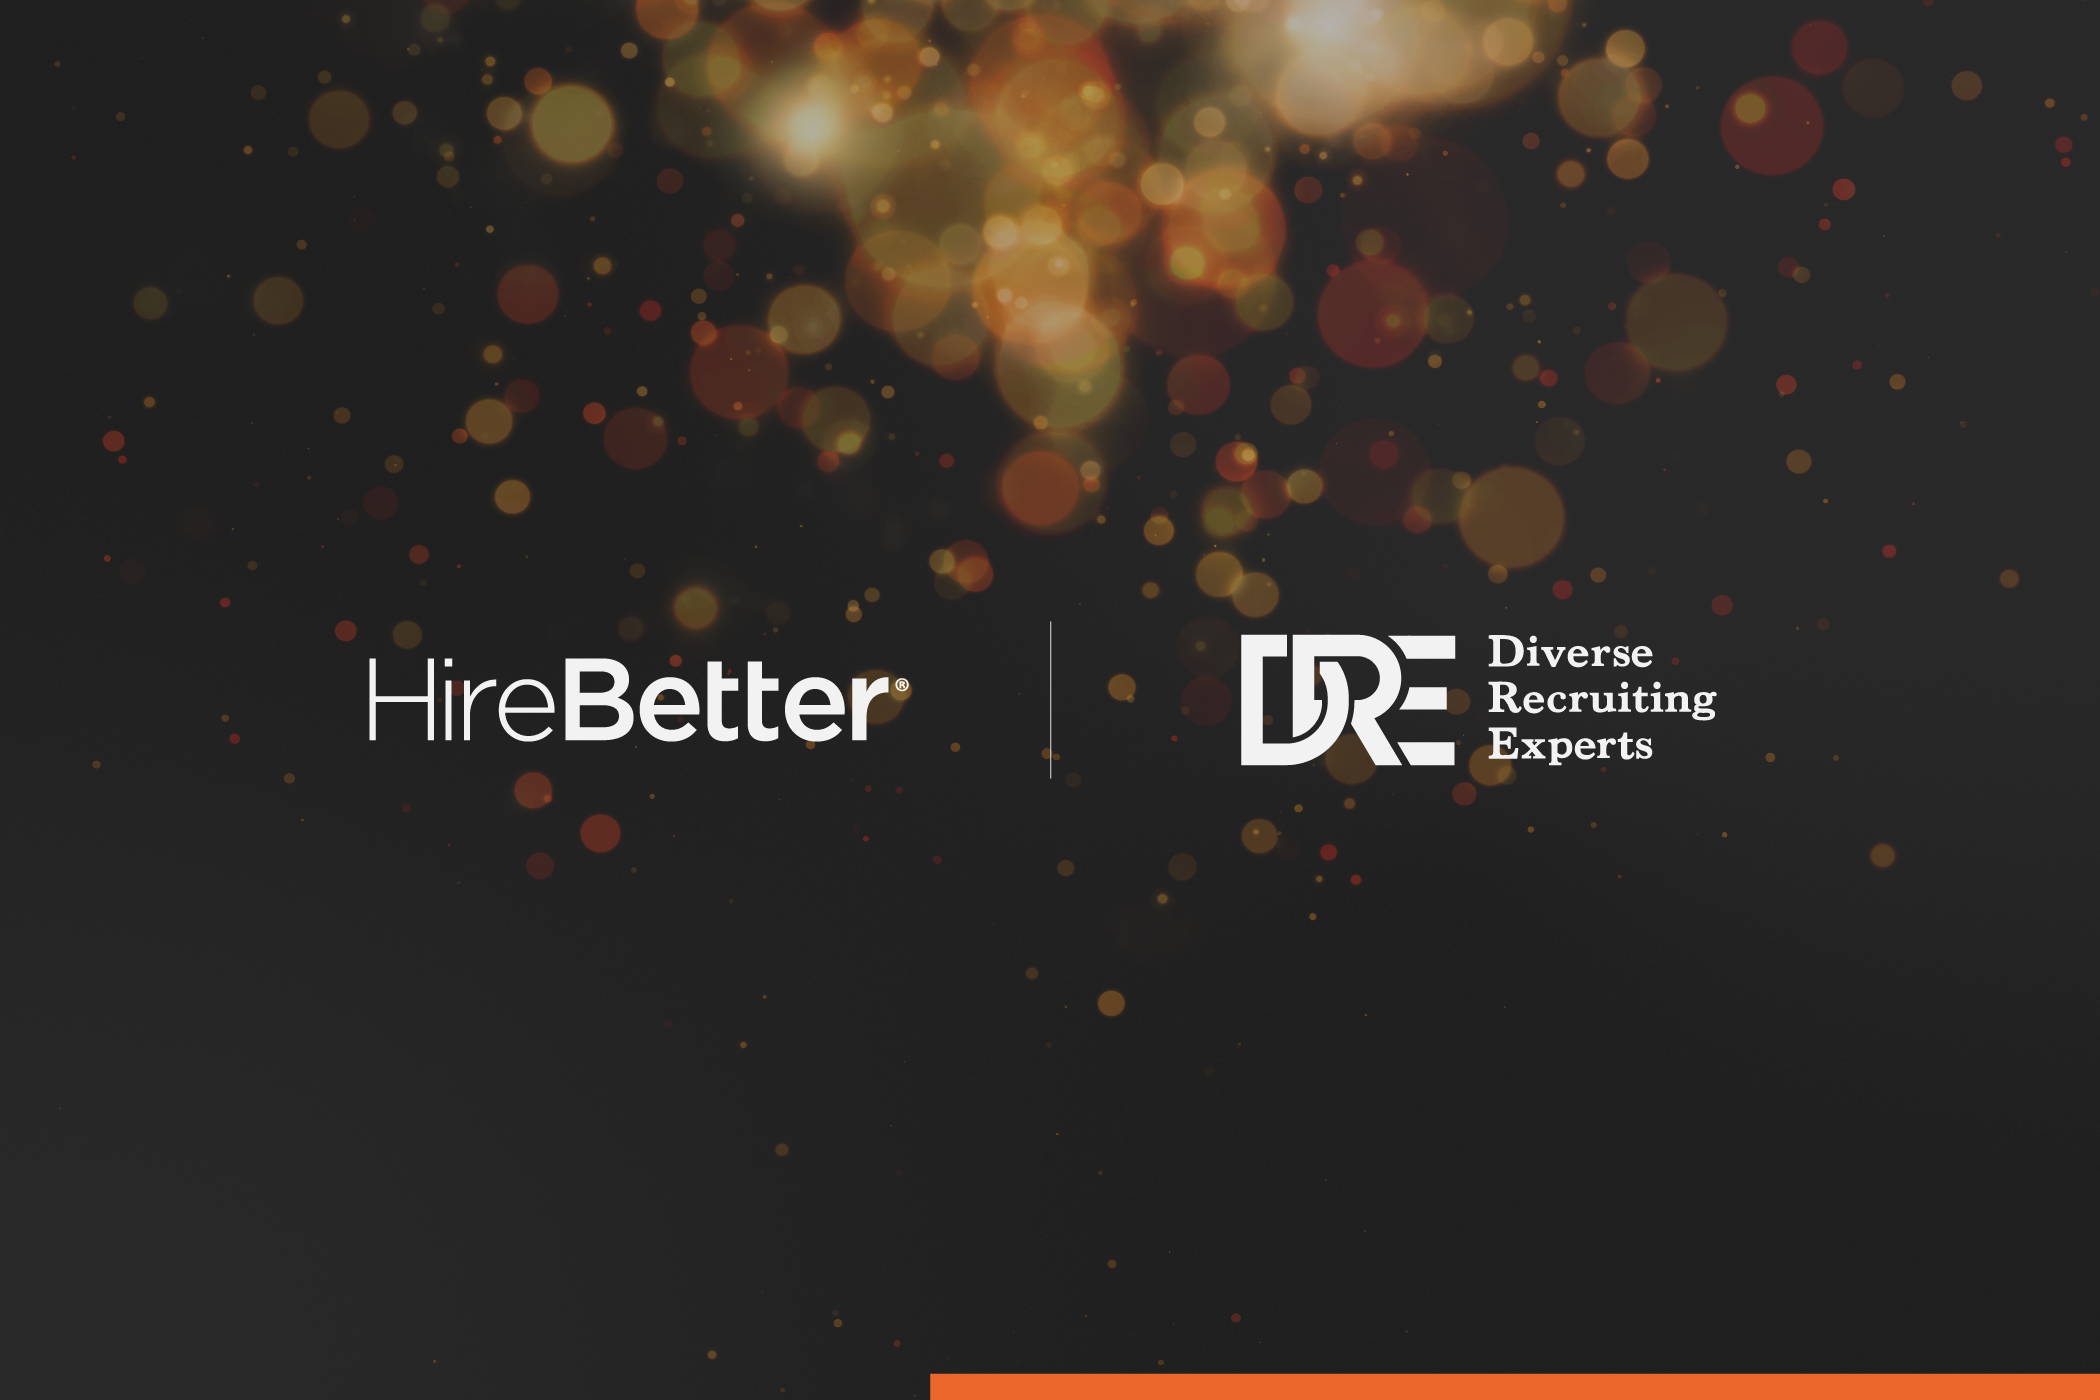 HireBetter acquires Diverse Recruiting Experts to Drive Service Offering Expansion